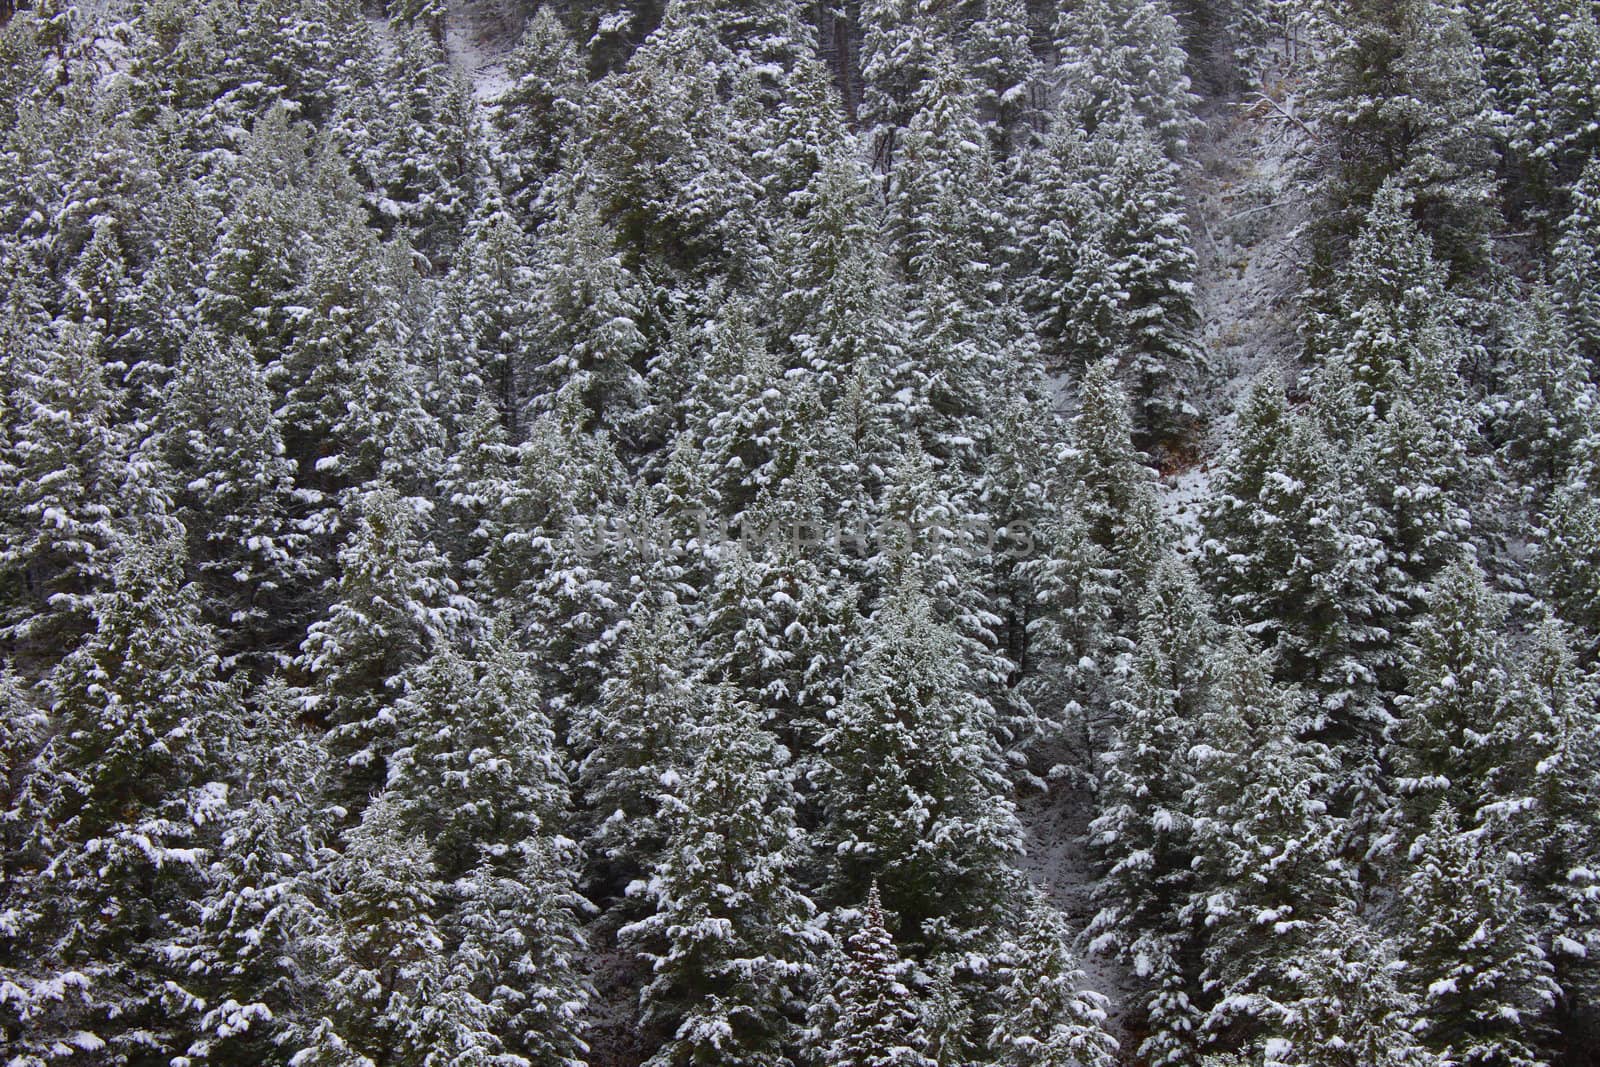 Background of snow covered pine trees in the Bridger Teton National Forest of Wyoming.